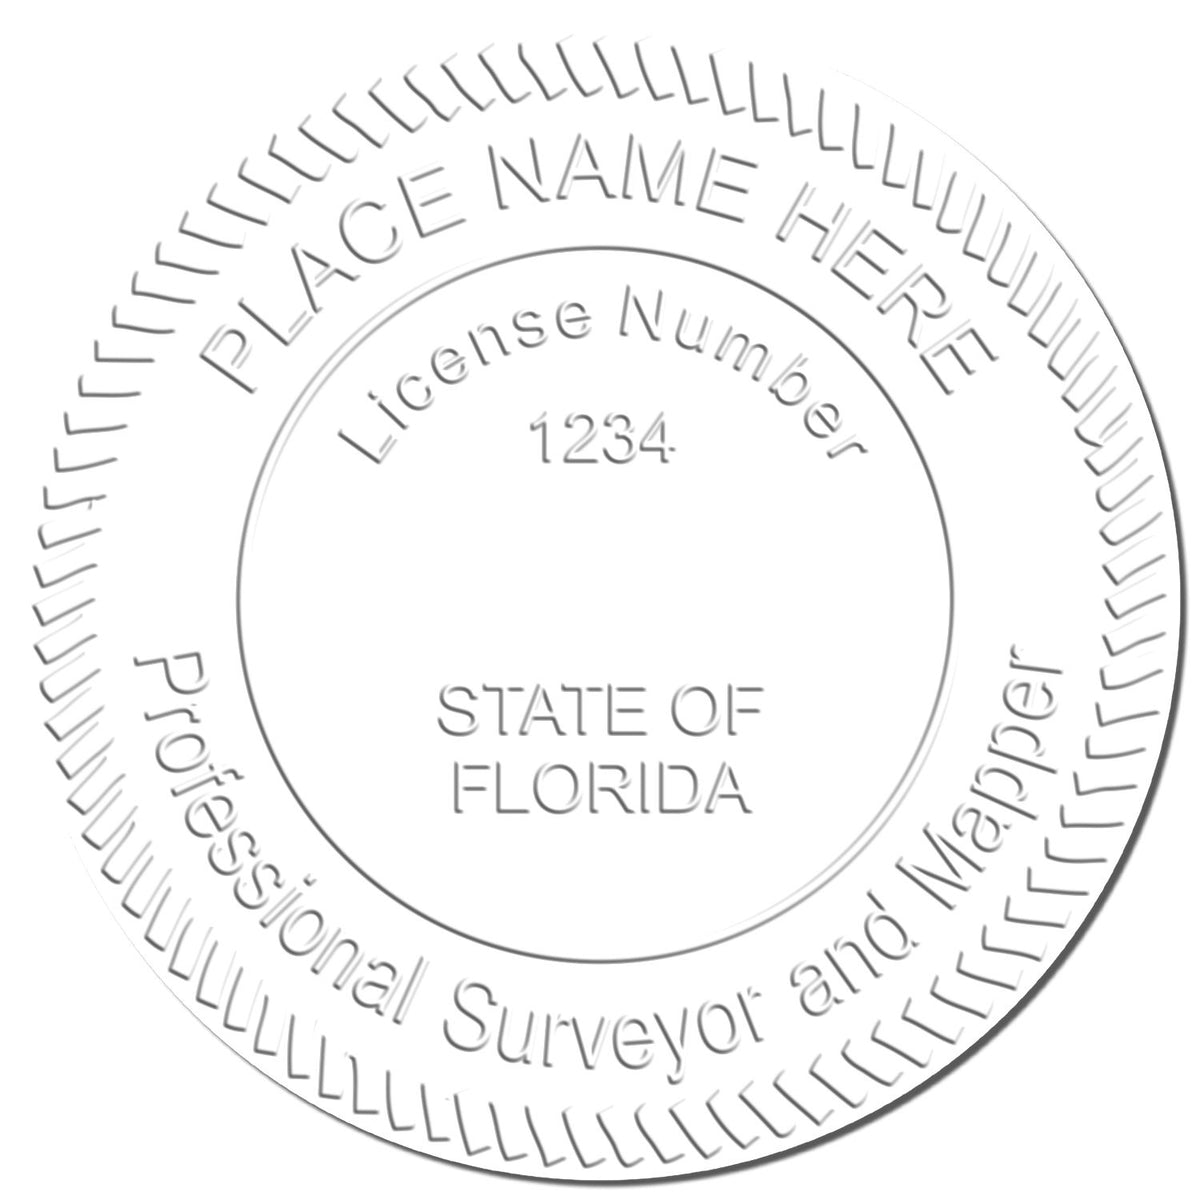 This paper is stamped with a sample imprint of the Handheld Florida Land Surveyor Seal, signifying its quality and reliability.